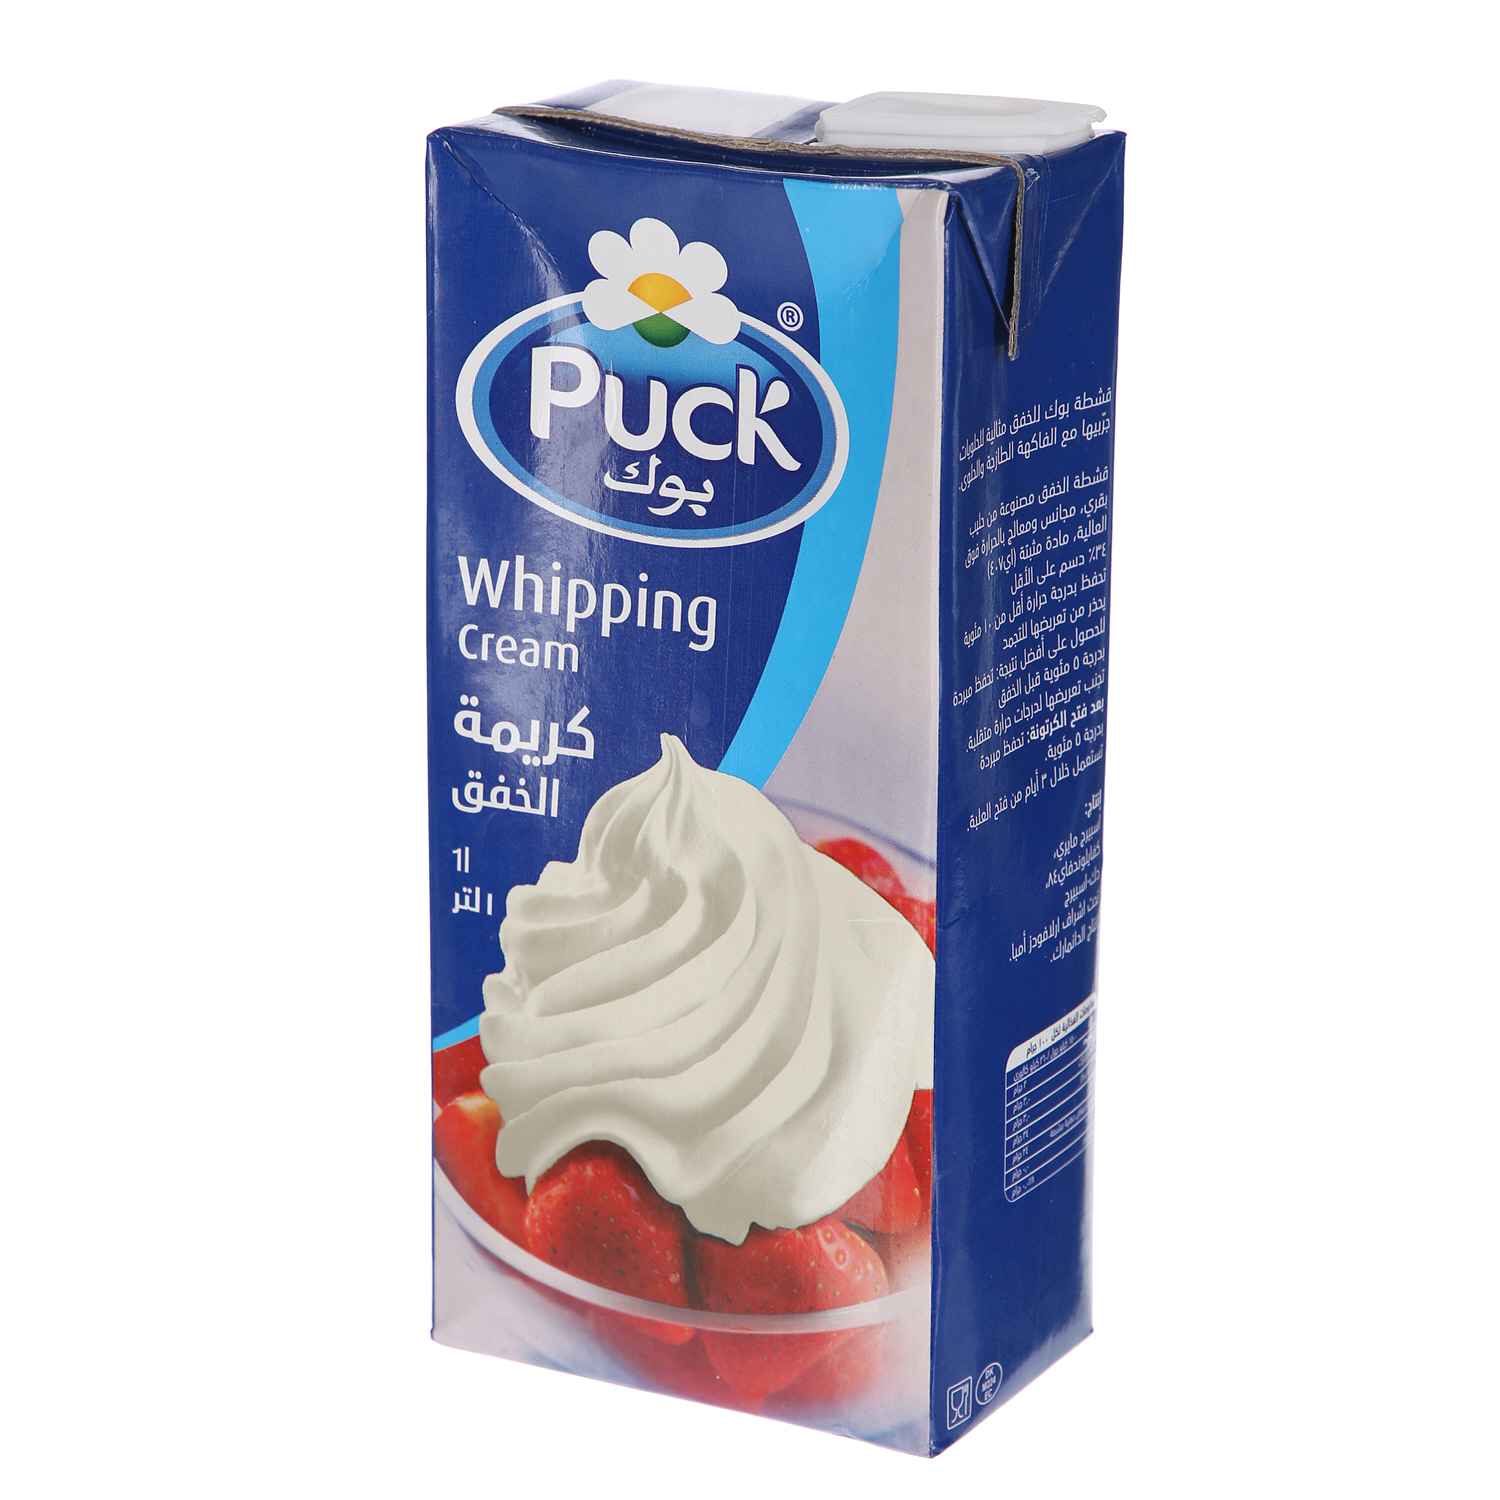 Puck Whipping Cream Full Fat 1Ltr